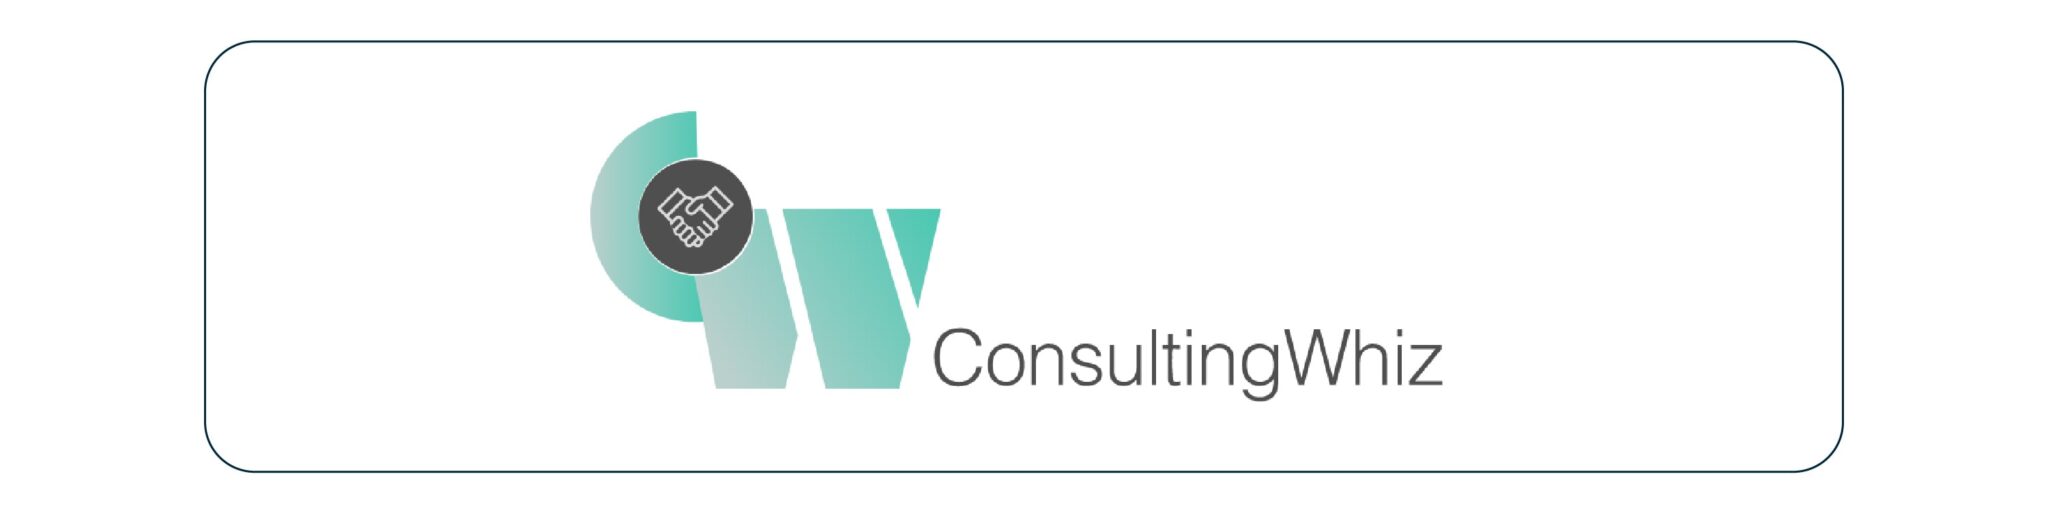 ConsultingWhiz is the best SaaS development company on the US market